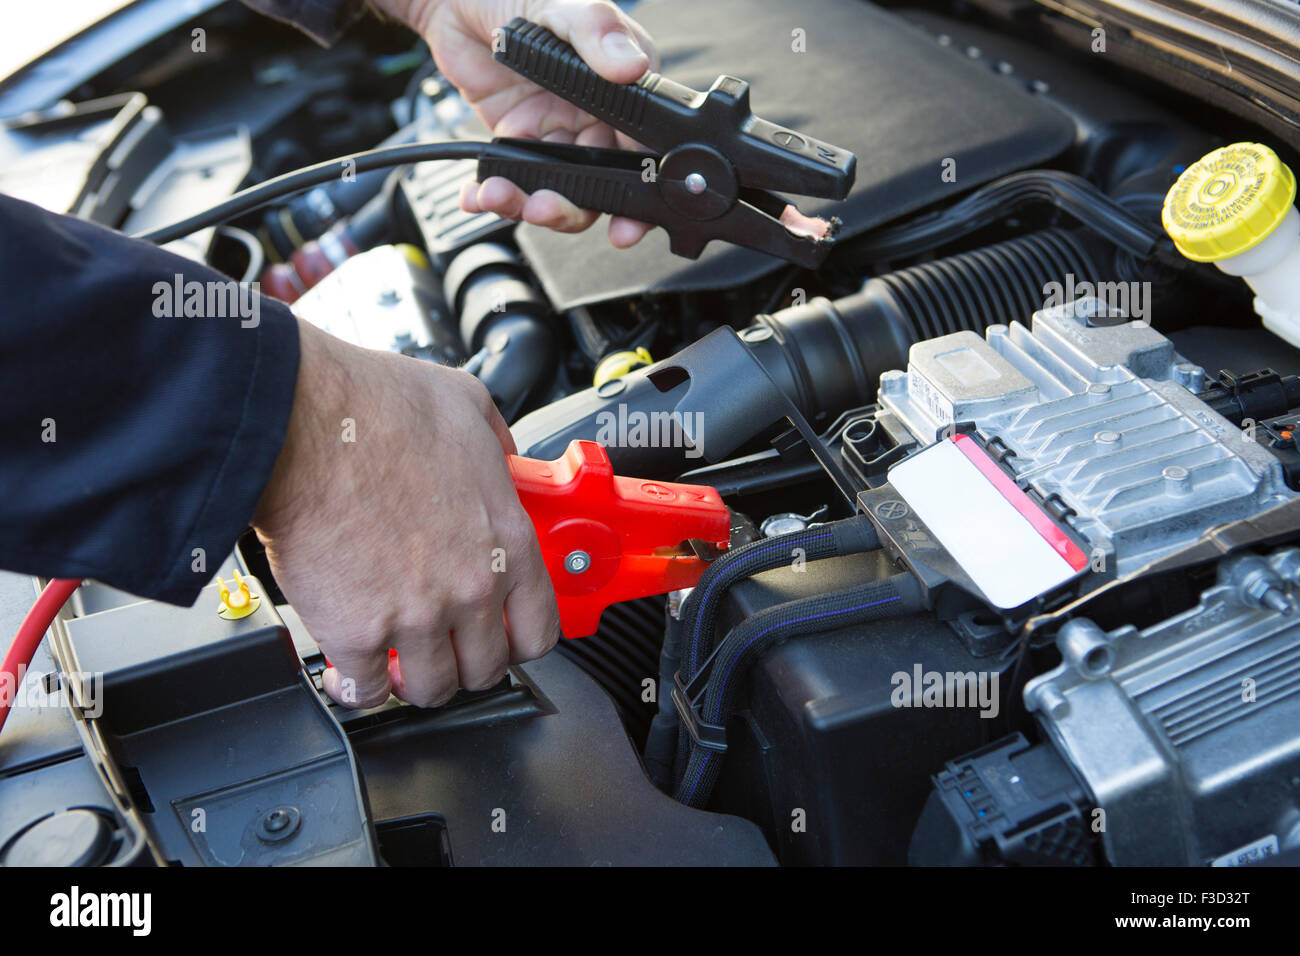 Close-Up Of Mechanic Attaching Jumper Cables To Car Battery Stock Photo